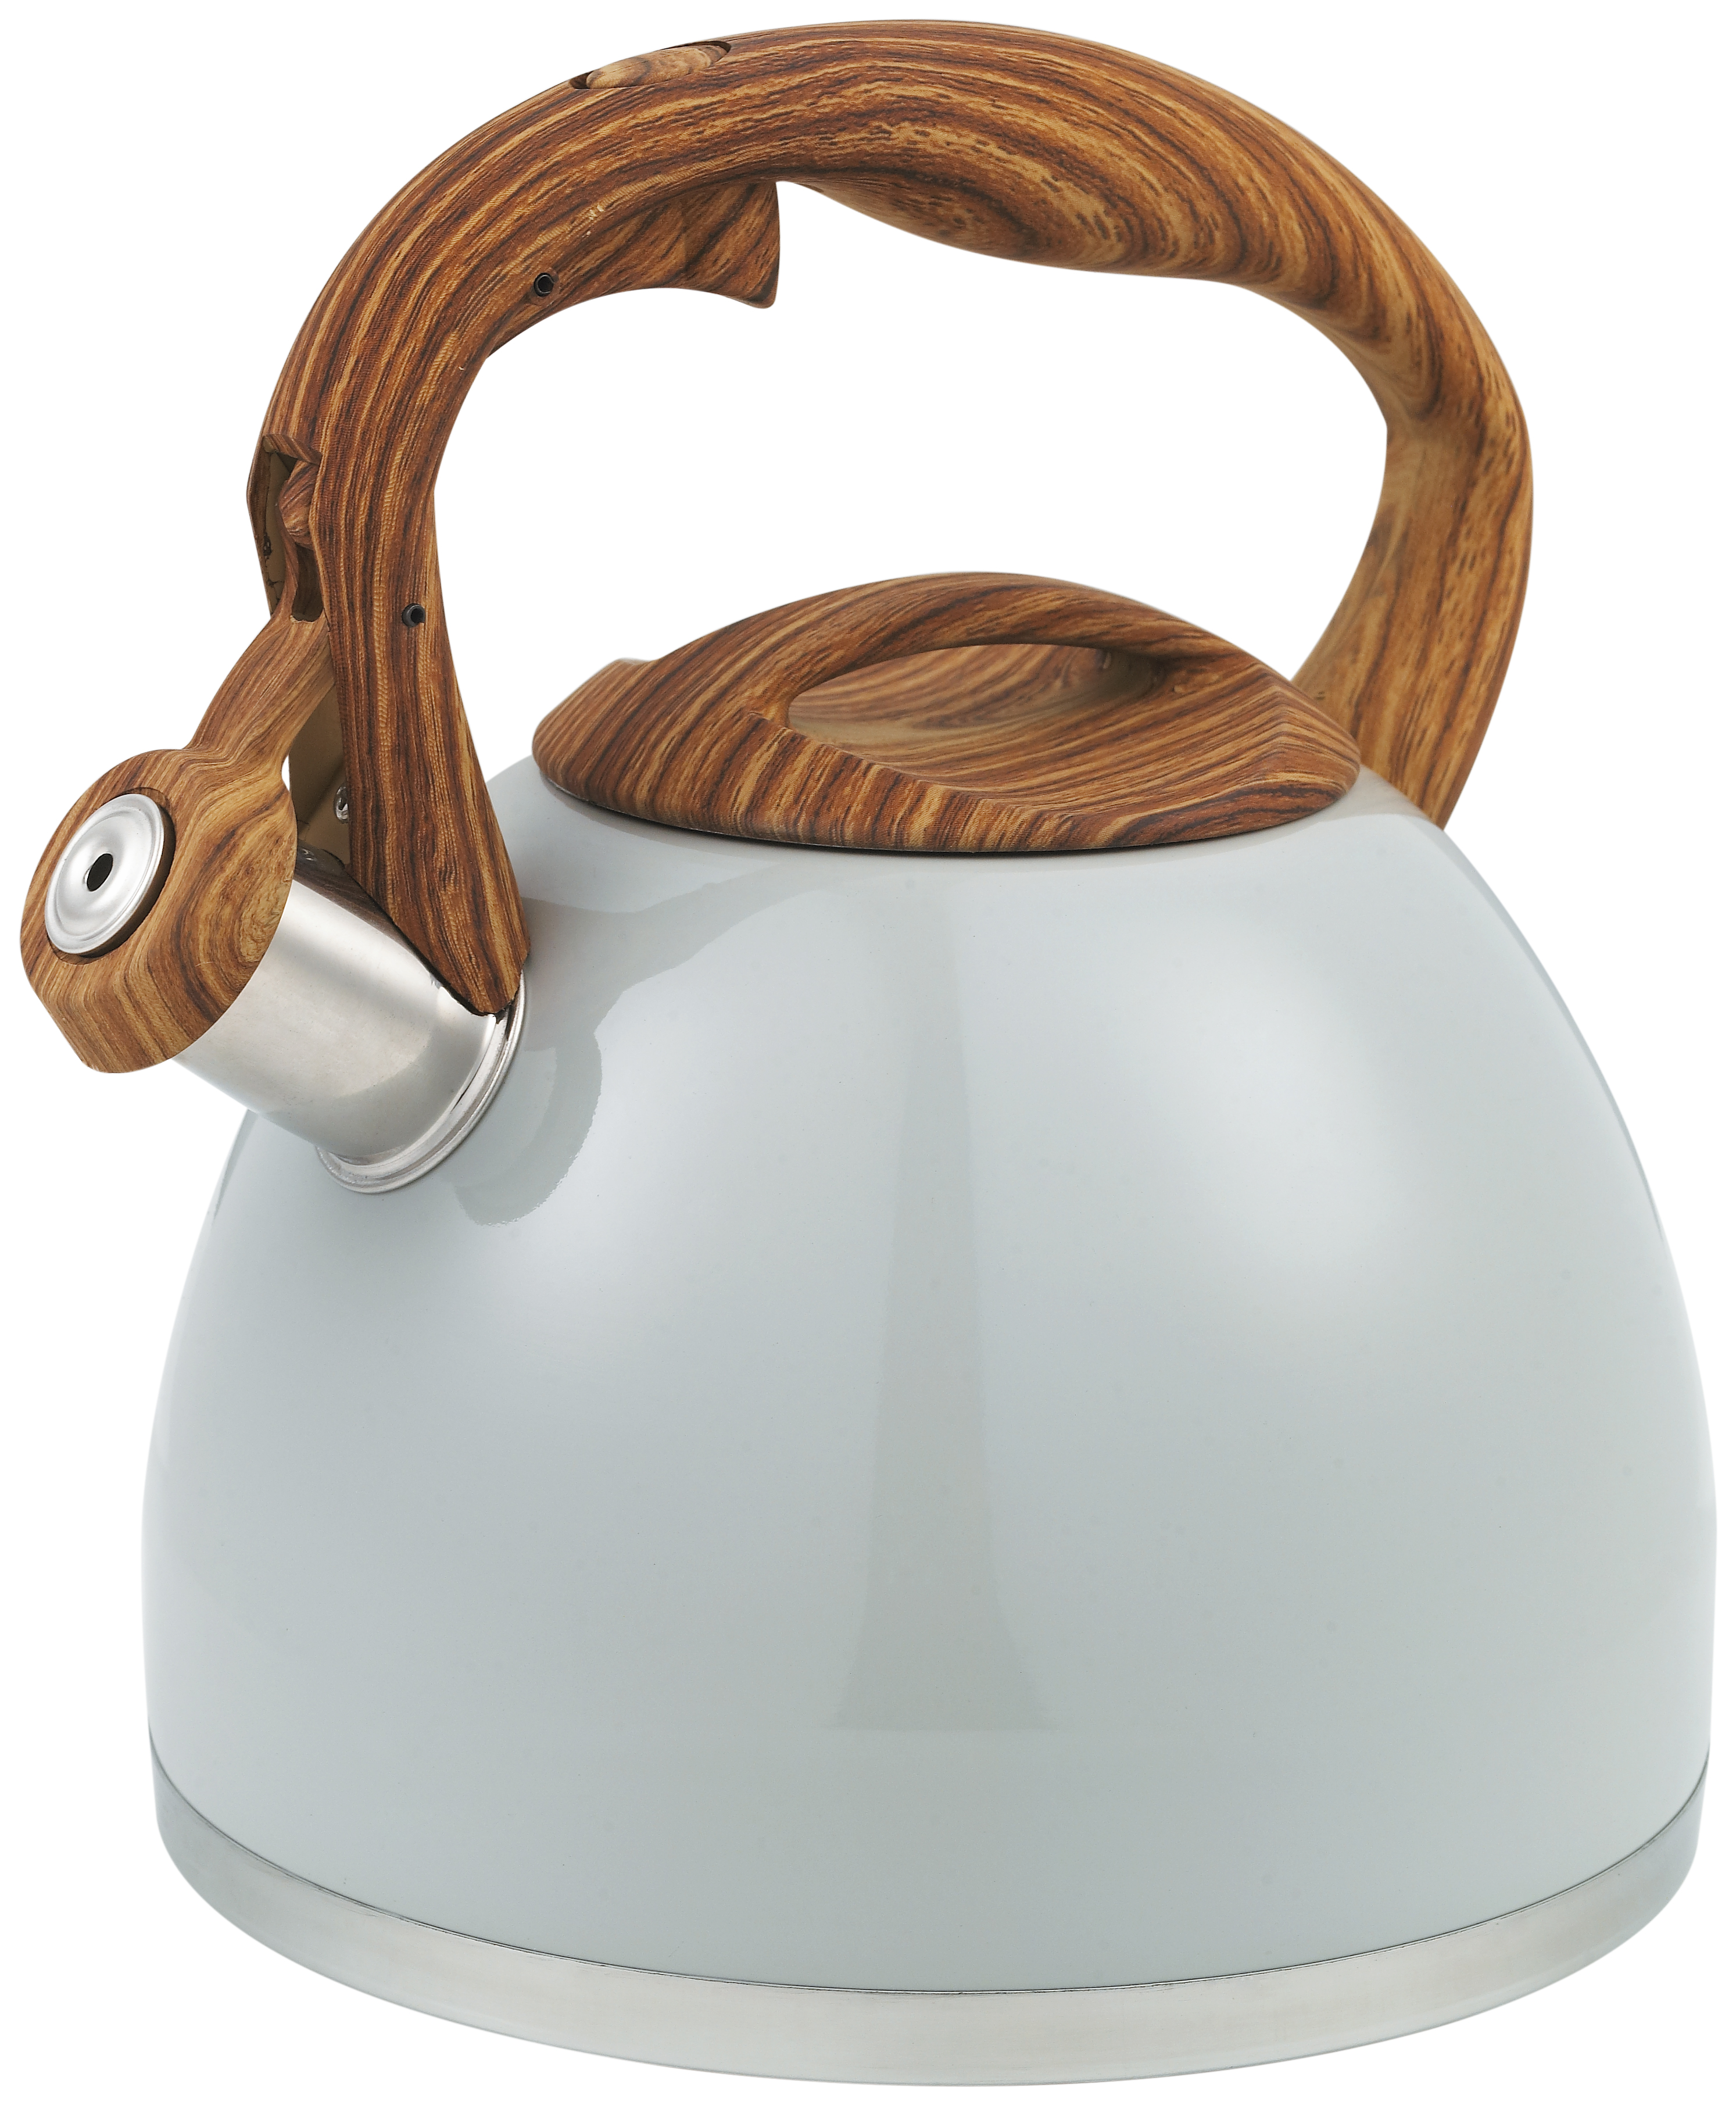 Whistling Kettles and the Charm of Stainless Steel